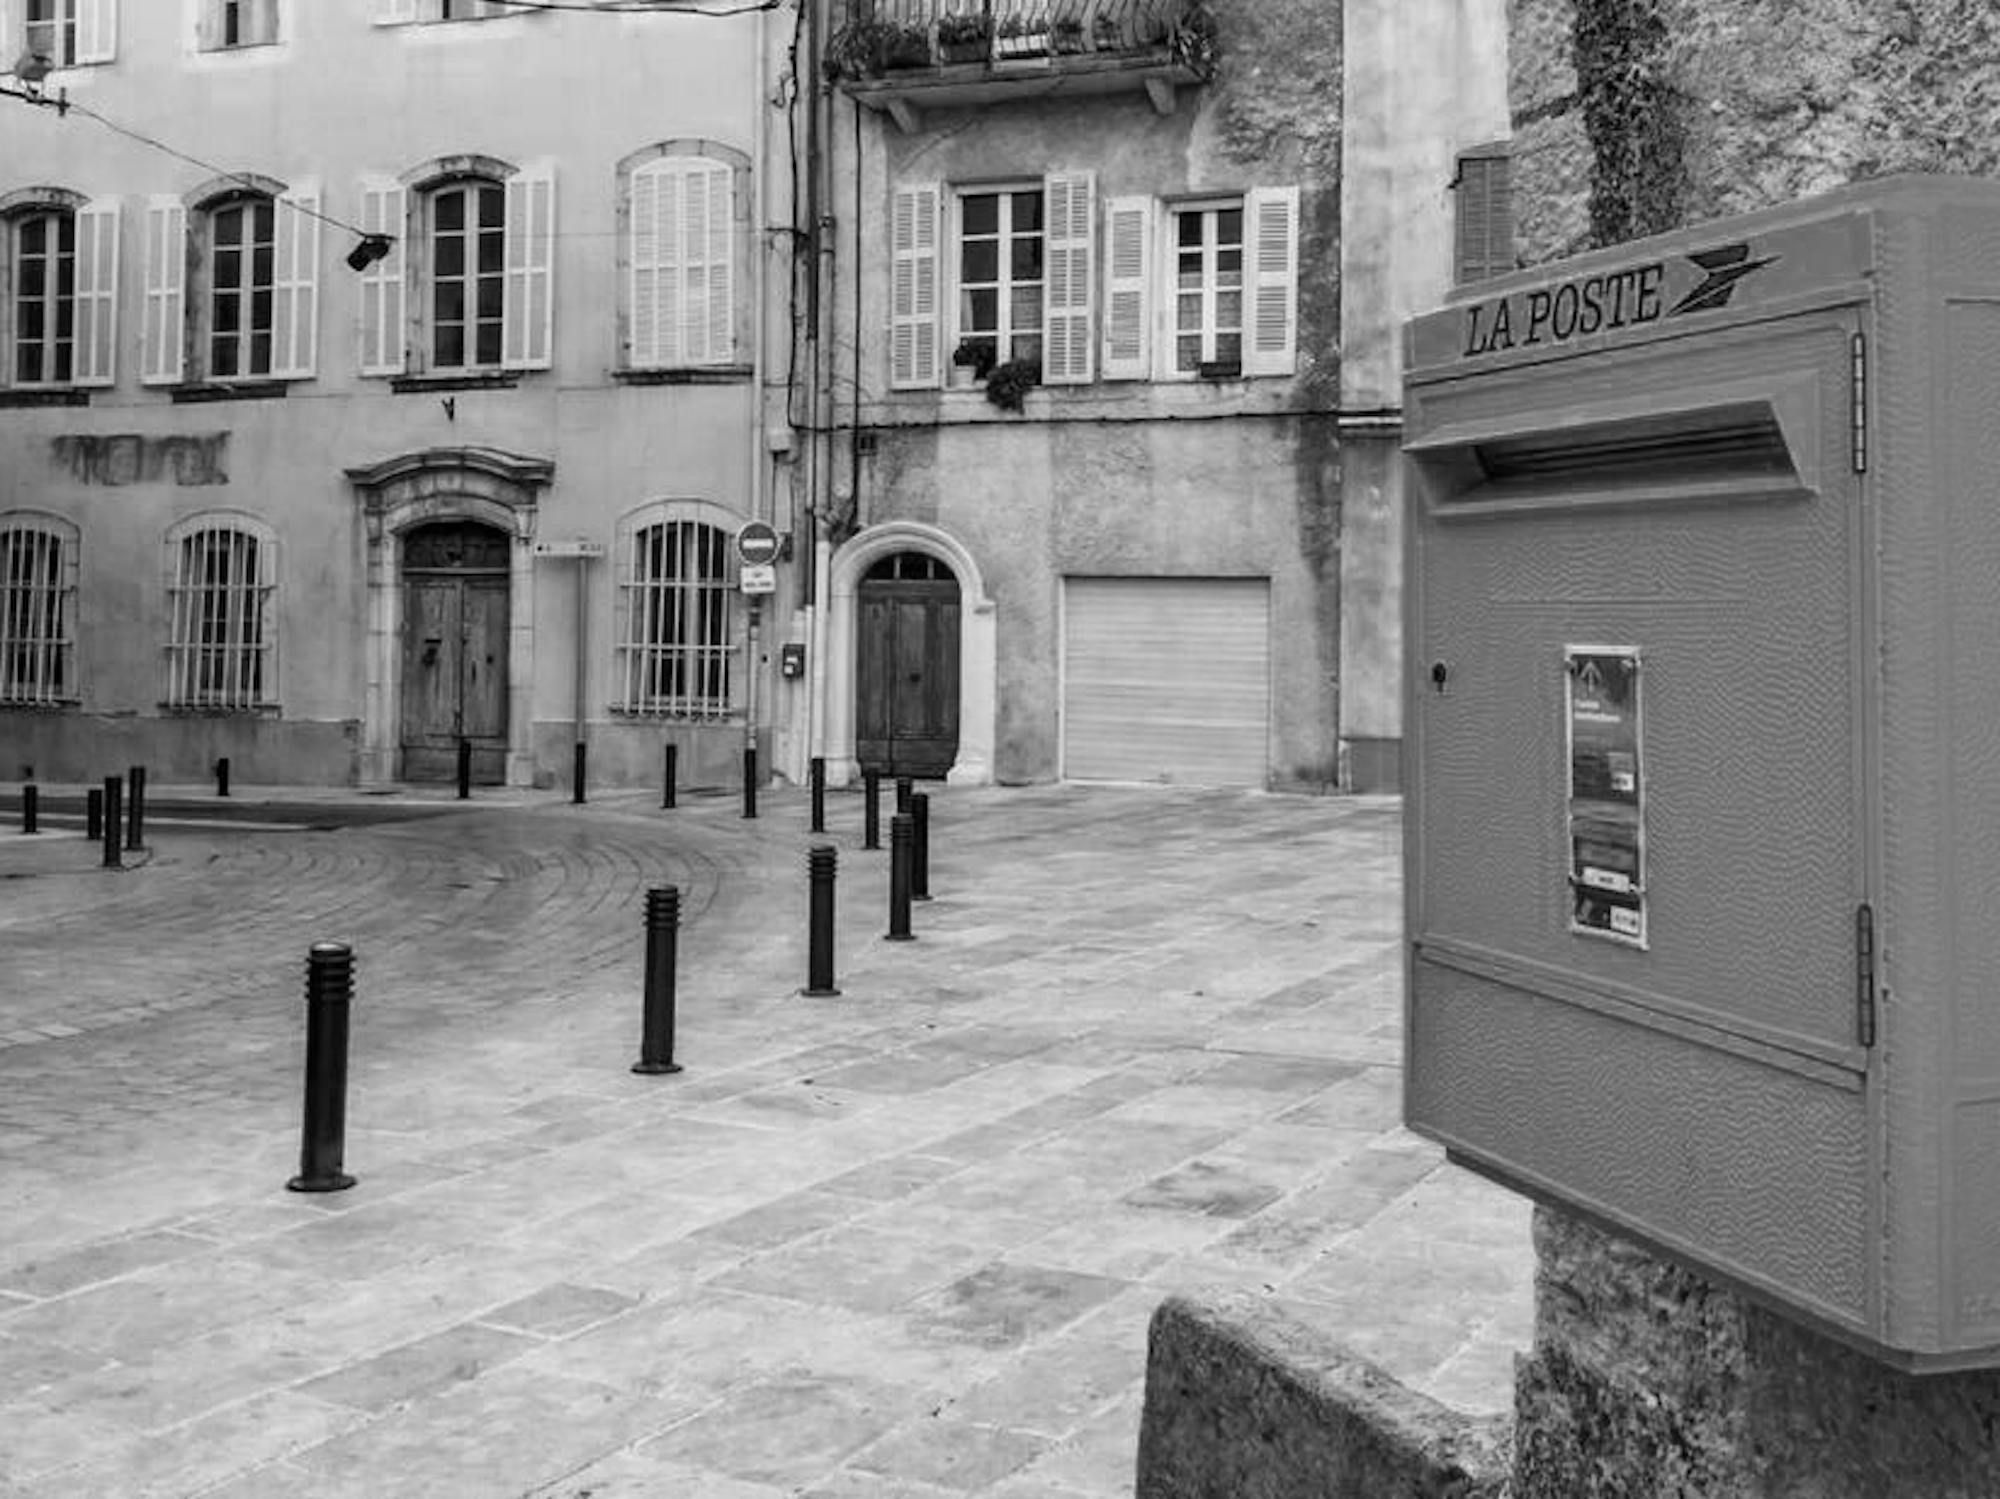 A mailbox in France